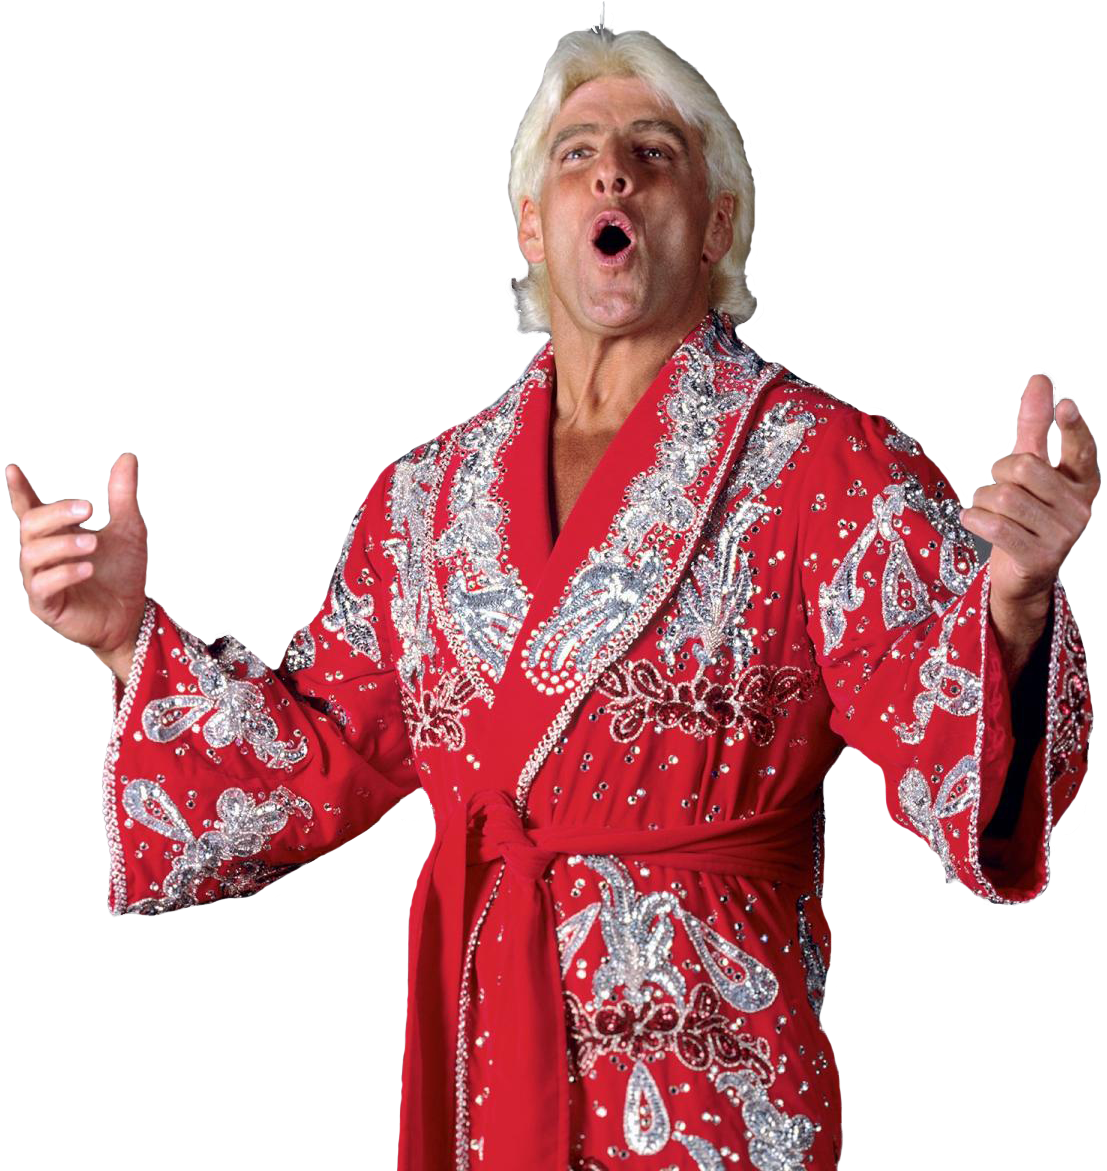 All Ric Flair Wrestling Action Figures